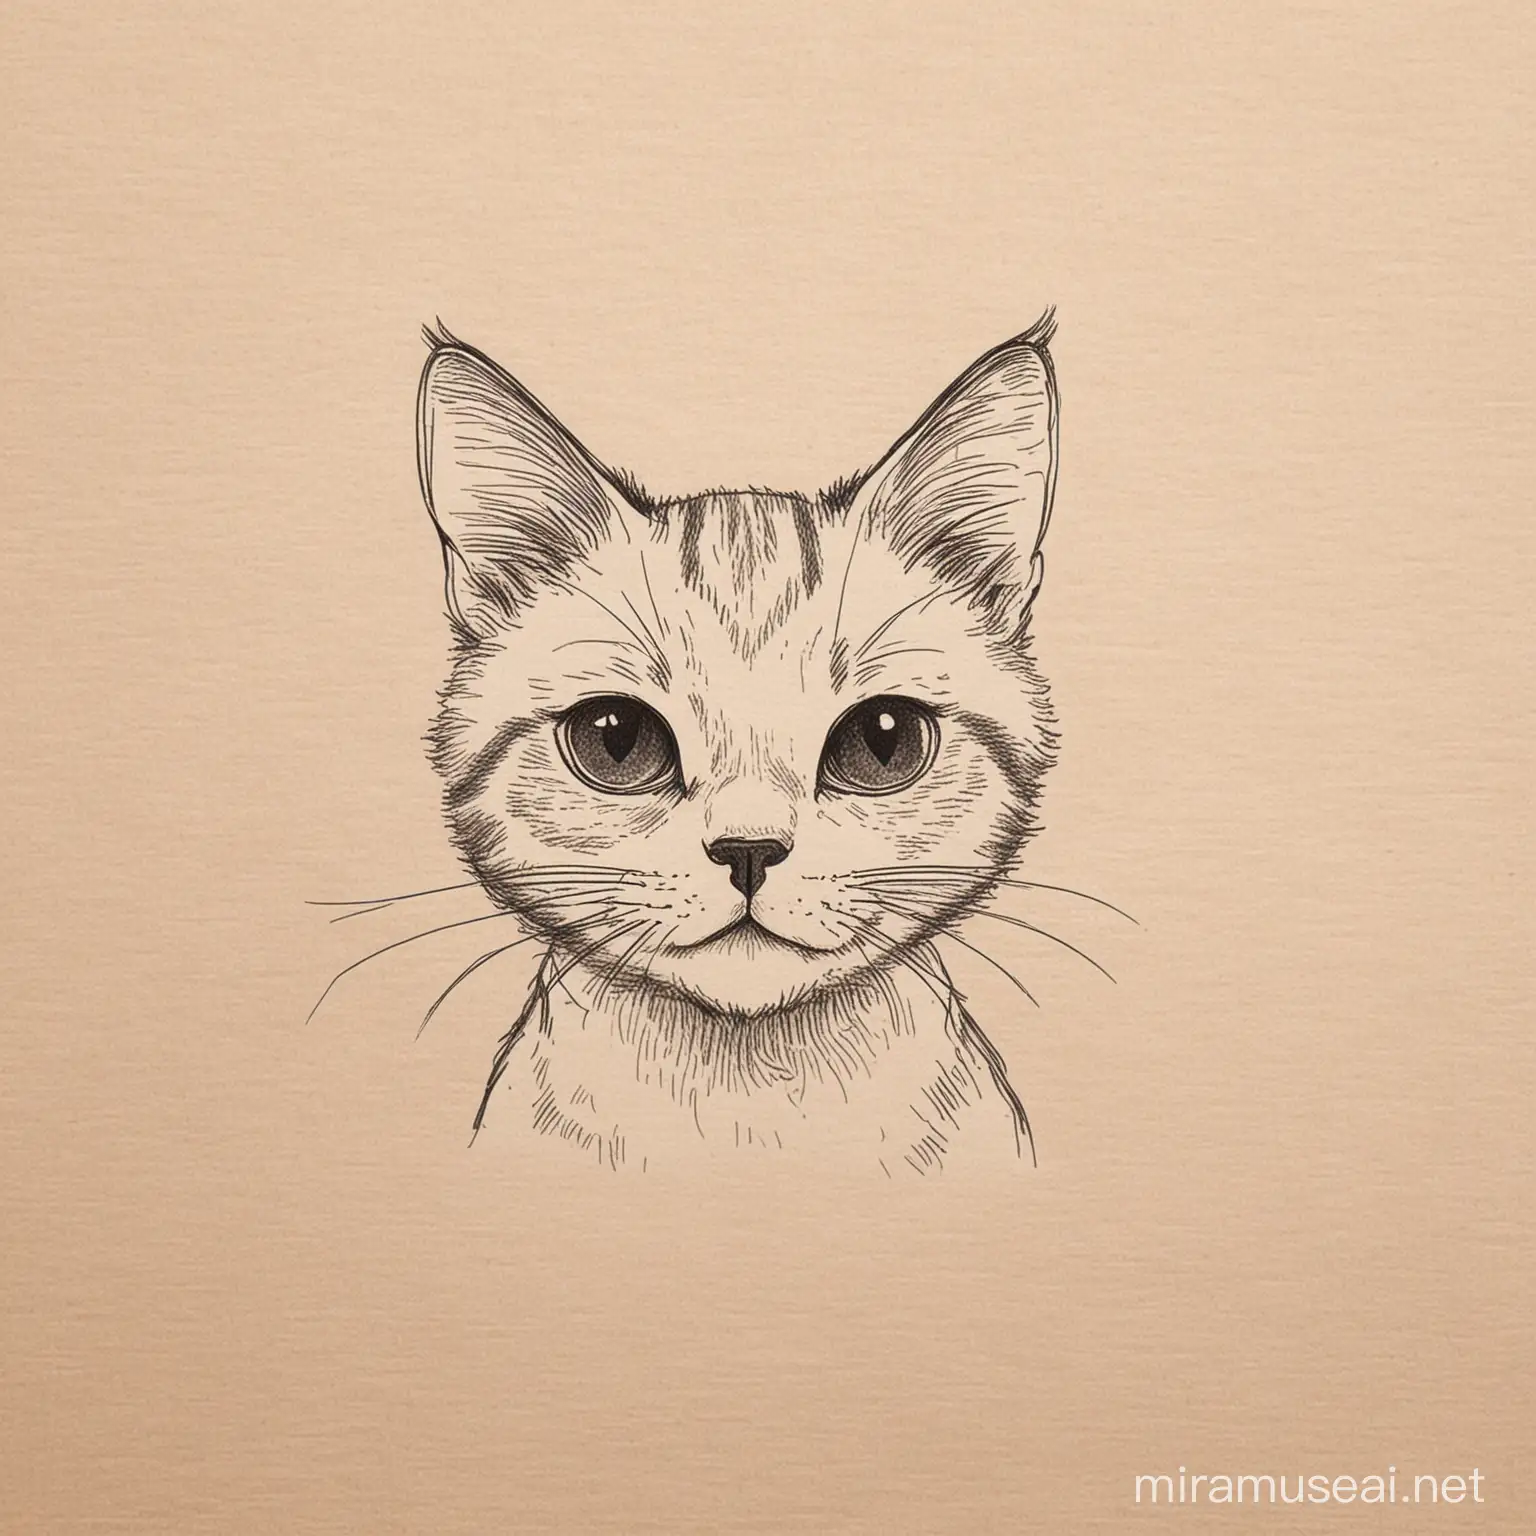 Hand drawn sketch of a cat or kitten that could be used as part of an Etsy shop logo for a shop that sells cat inspired homewares and clothing. The design should be minimalistic, and focus on the whiskers and ears. The design should be classy and elegant but affordable.